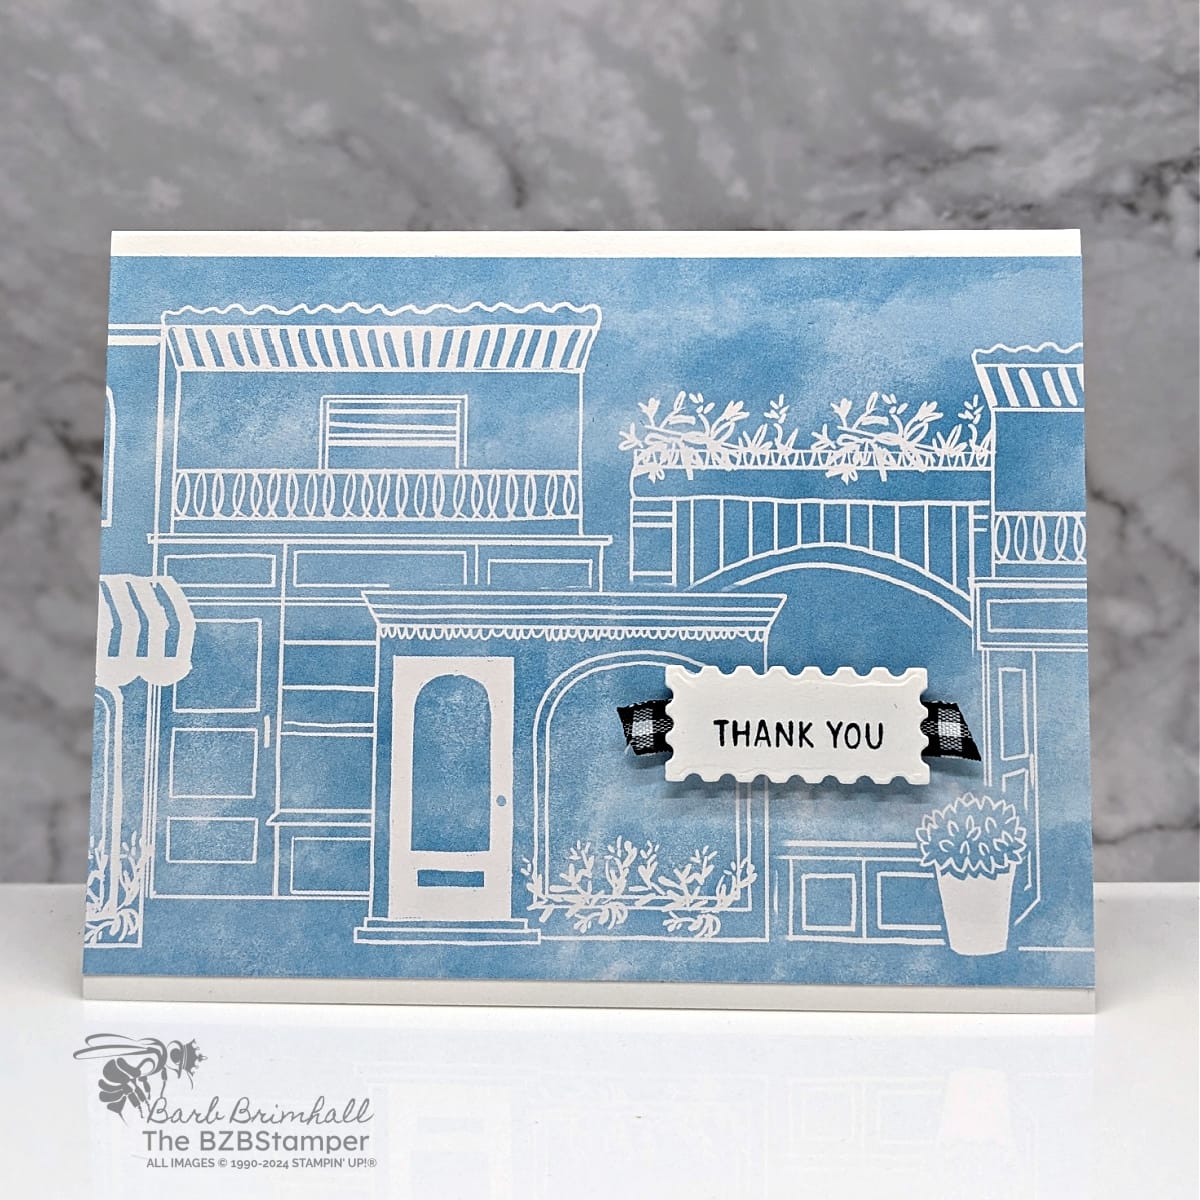 Thank You Card using the Les Shoppes Designer Paper in blue and white, with black gingham ribbon and a thank you sentiment.